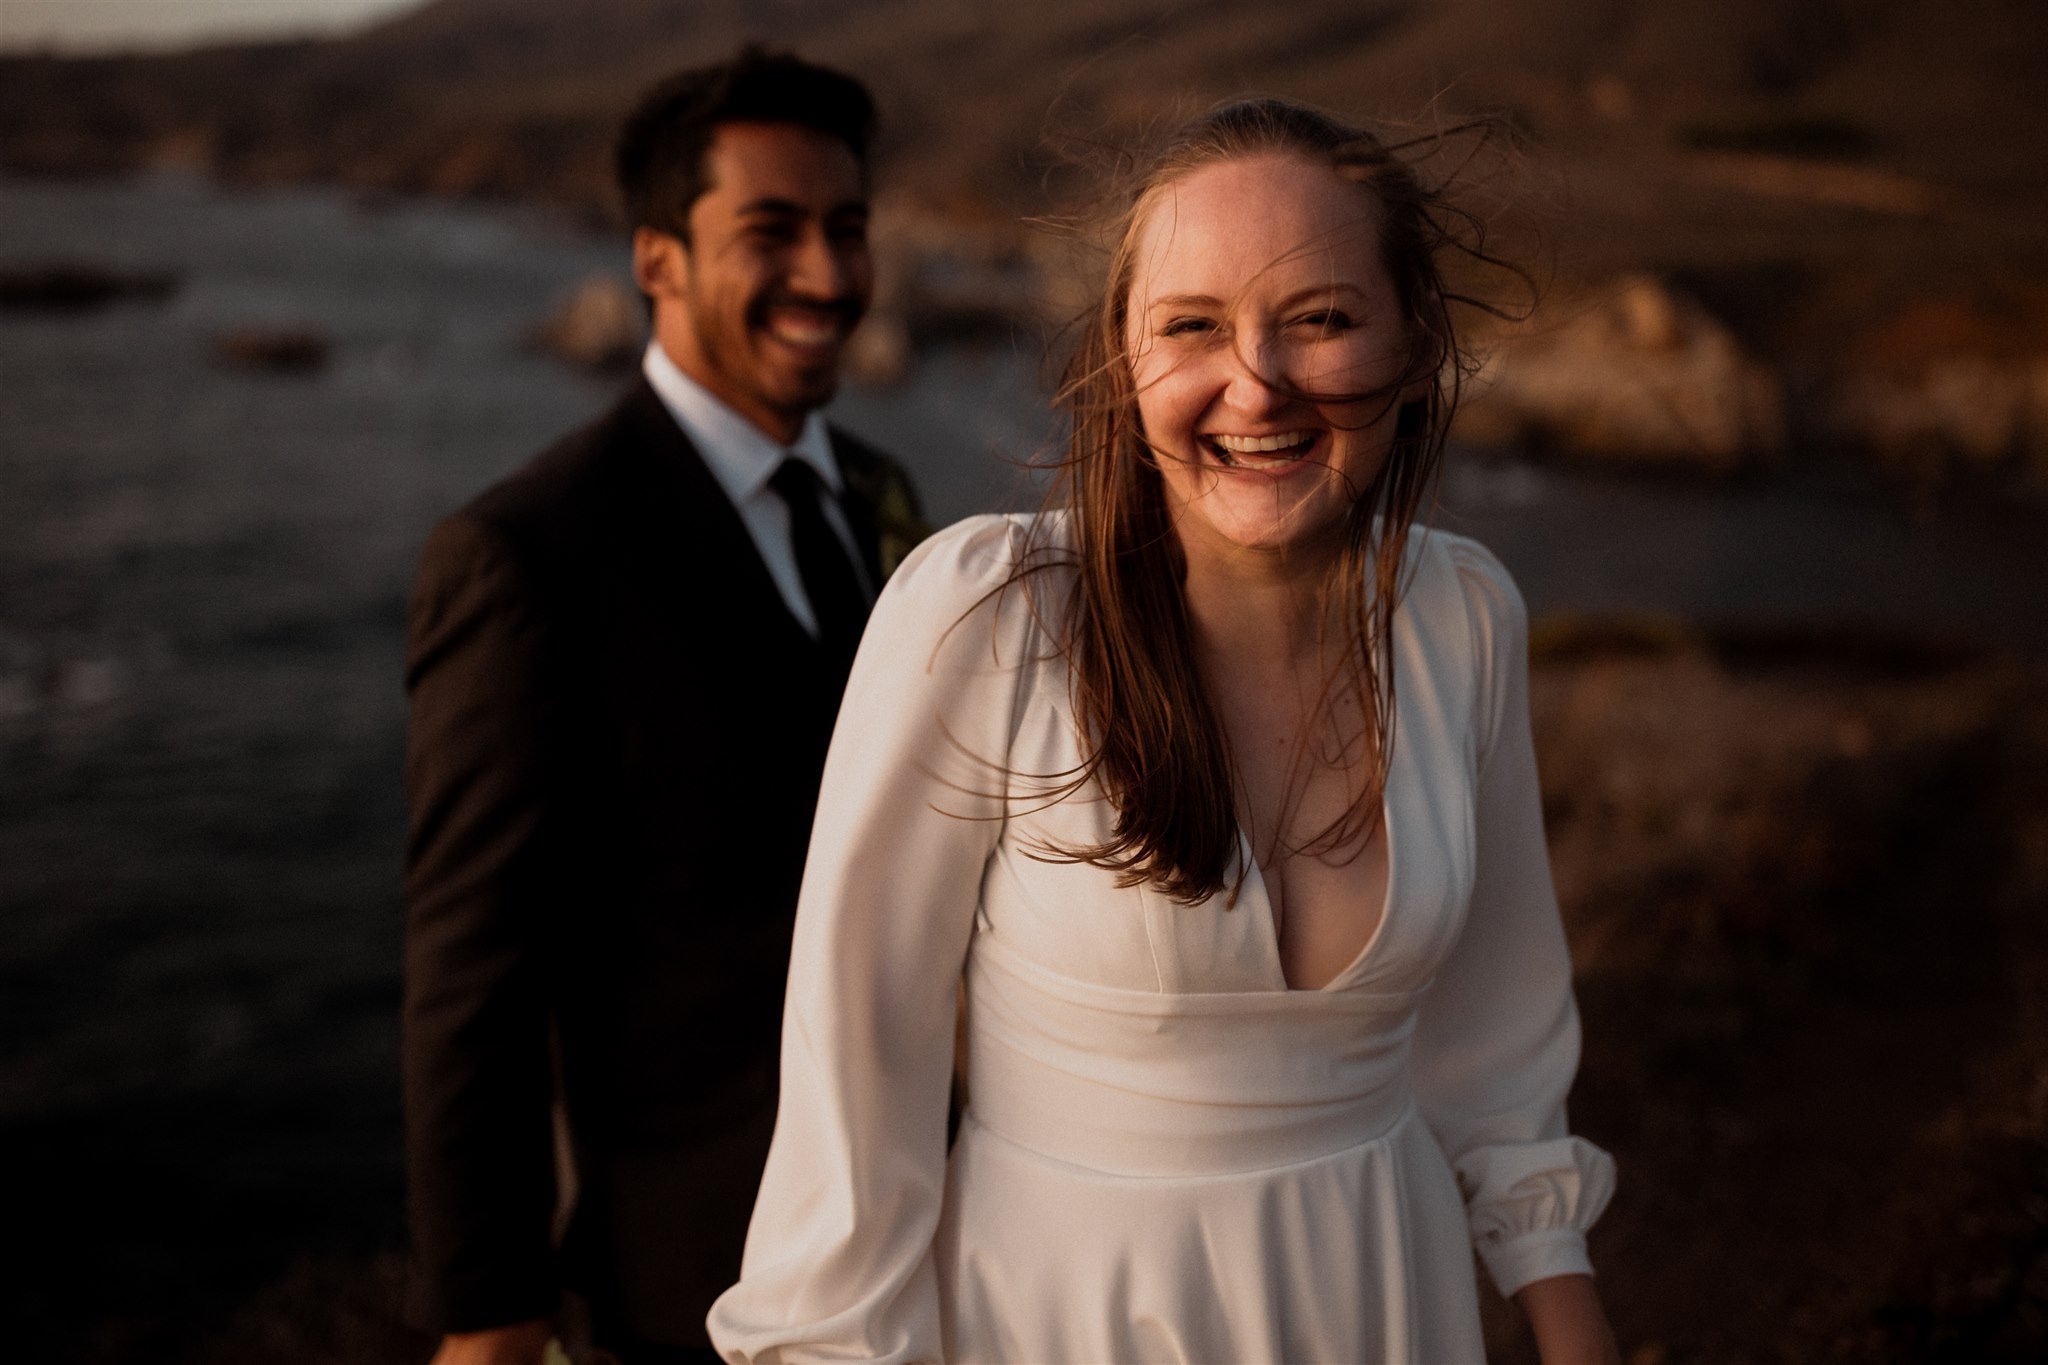 079_Two-Day Big Sur Redwoods Elopement with Family_Will Khoury Elopement Photographer.jpg